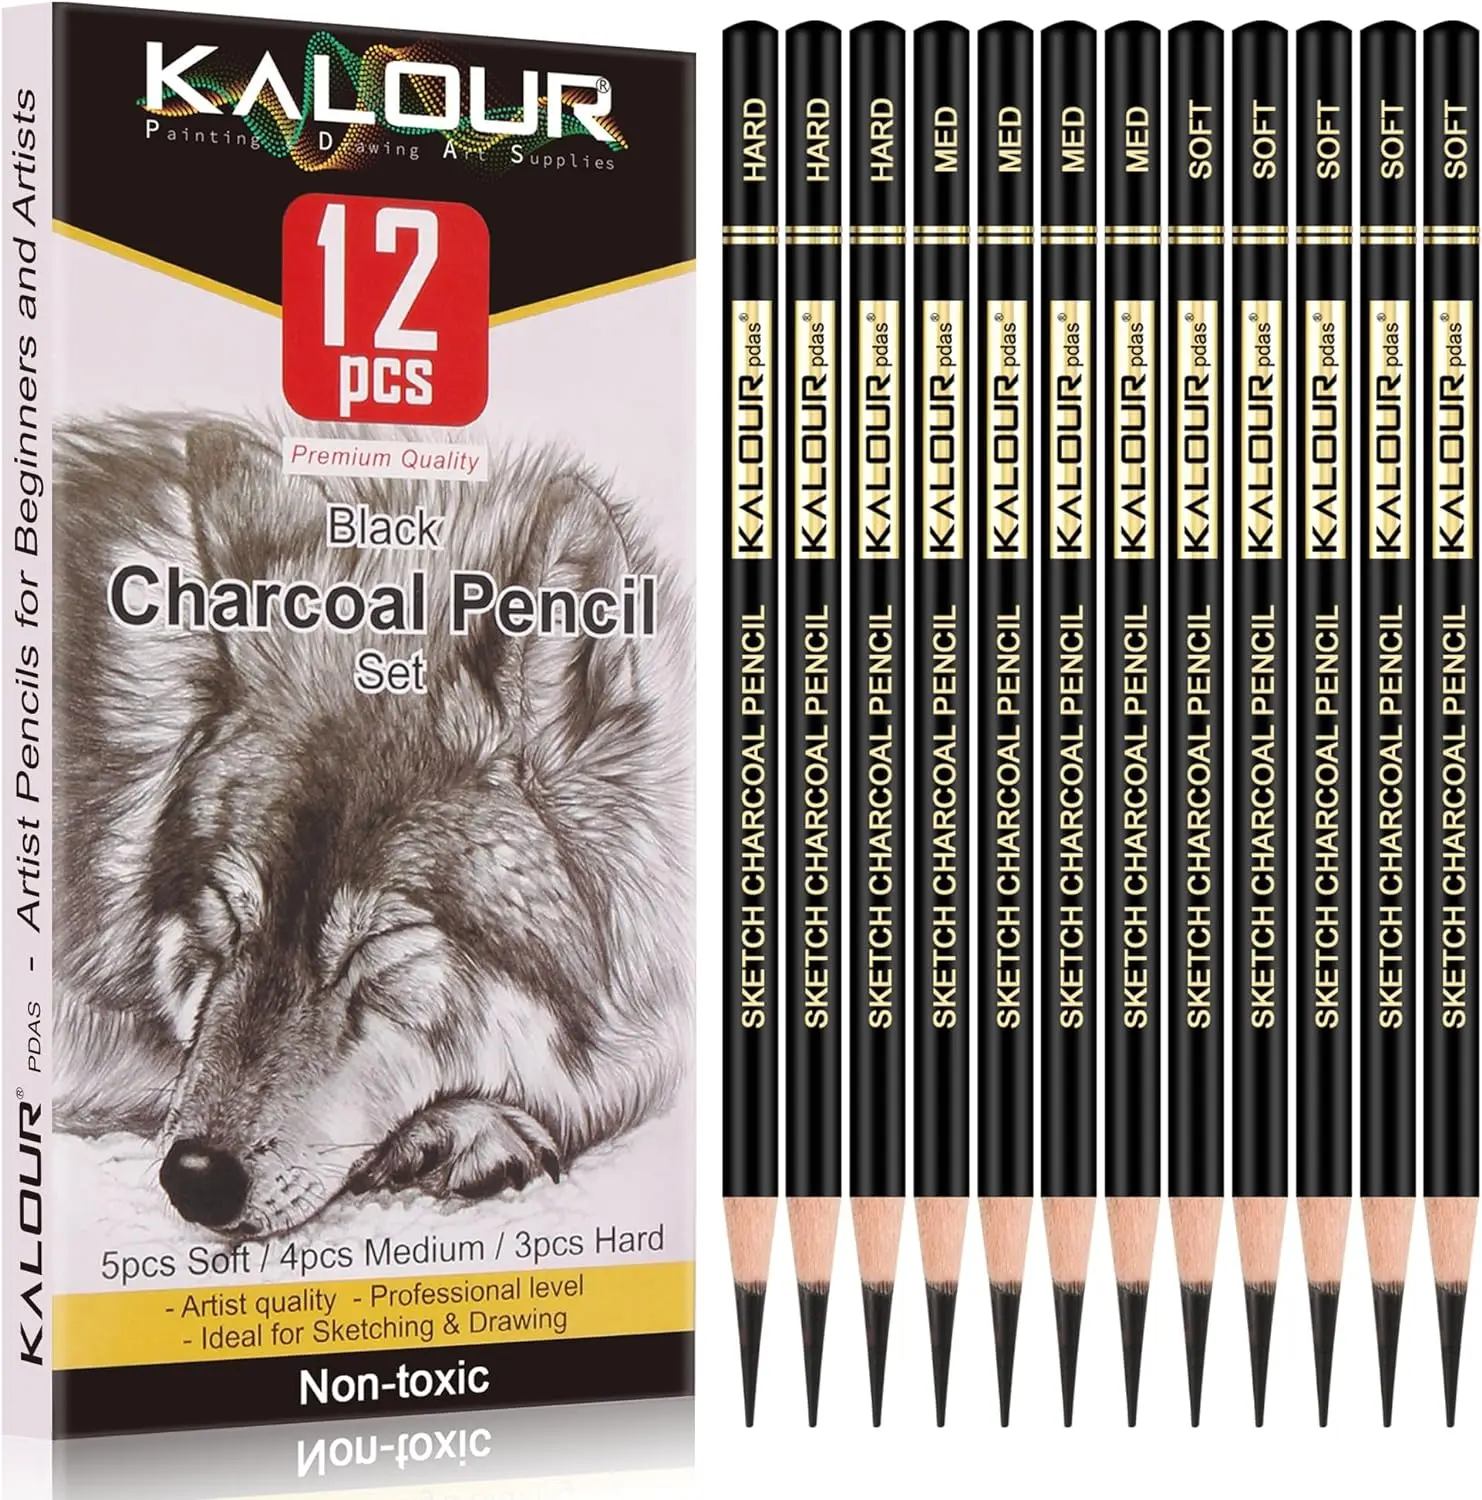 Professional Charcoal Pencils Drawing Set -12 Pieces Soft, Medium and Hard Charcoal Pencils for Drawing, Sketching, Shading, Art 25pcs shading sketching charcoal durable charcoal sticks hobbyist compressed willow charcoal